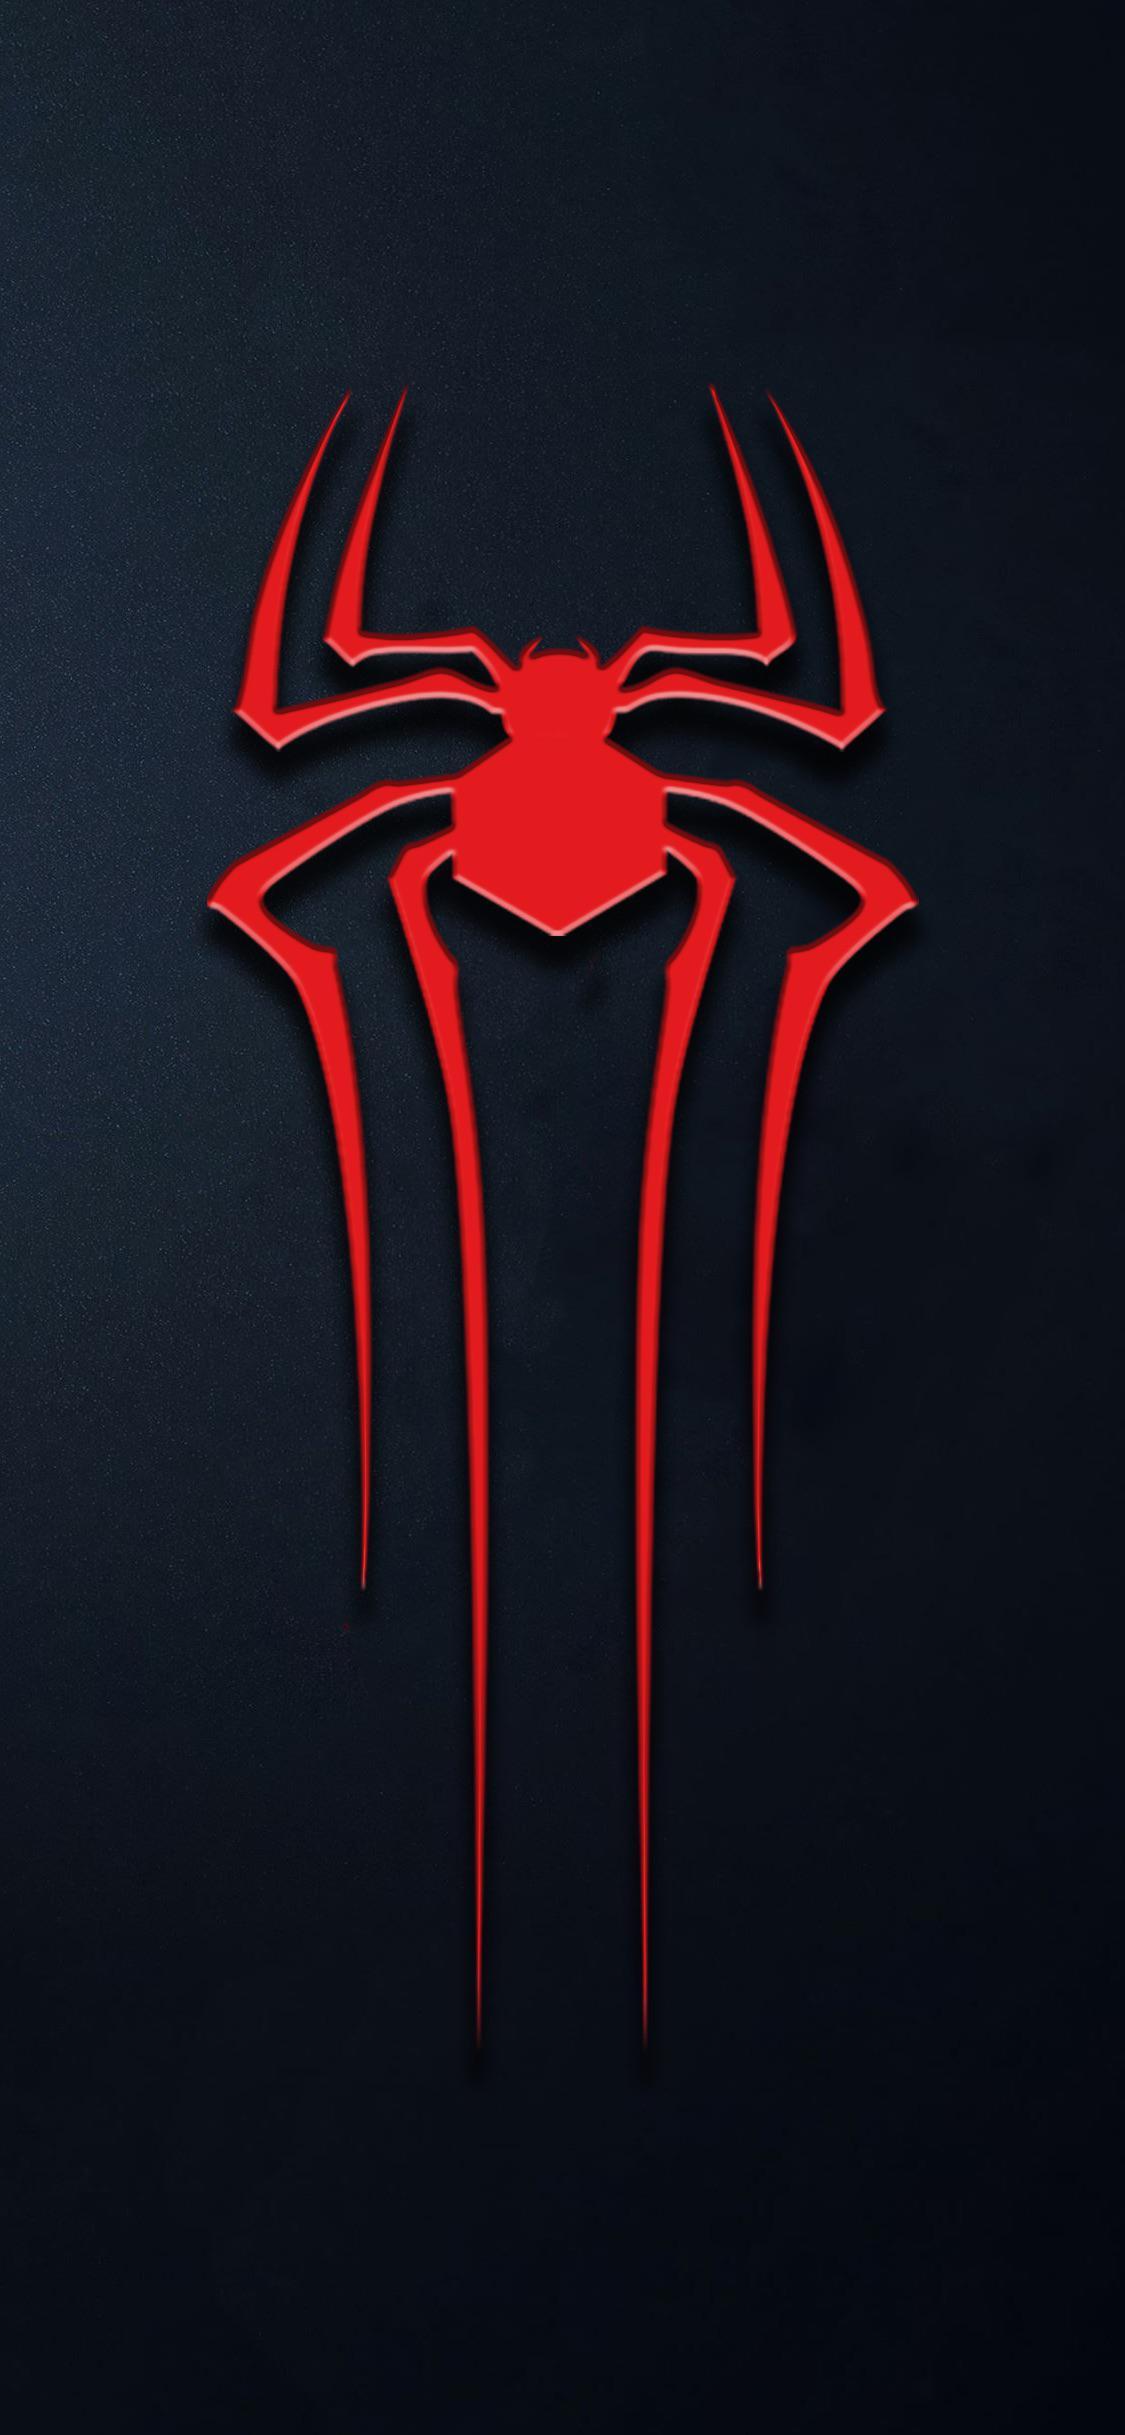 Made A iPhone Wallpaper Of The Three Spider Symbols Together R